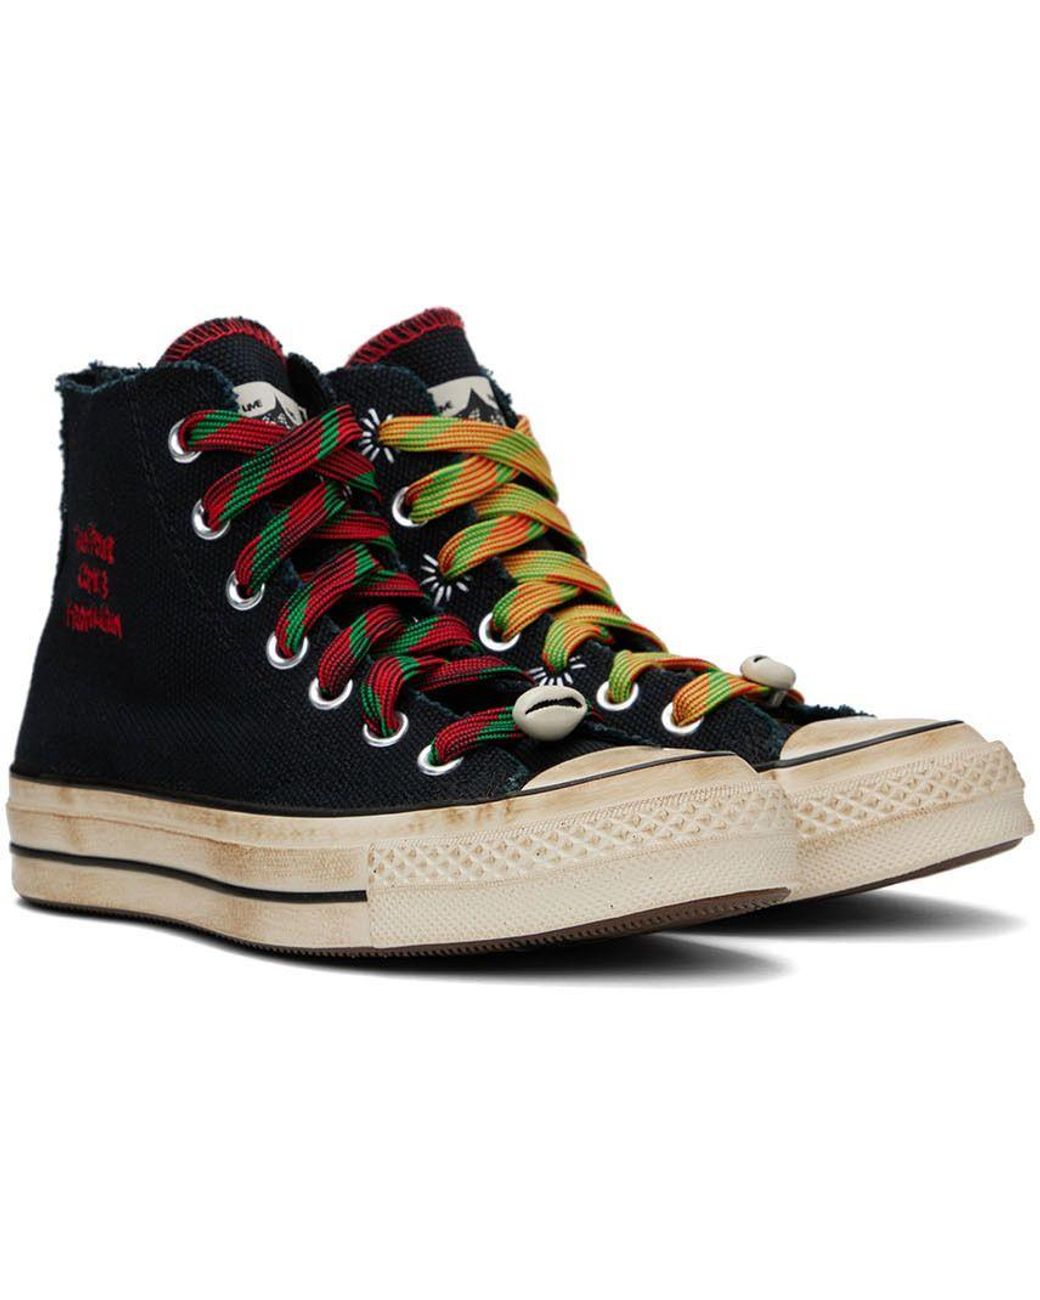 Converse Barriers Edition Chuck 70 Hi Sneakers in Black | Lyst